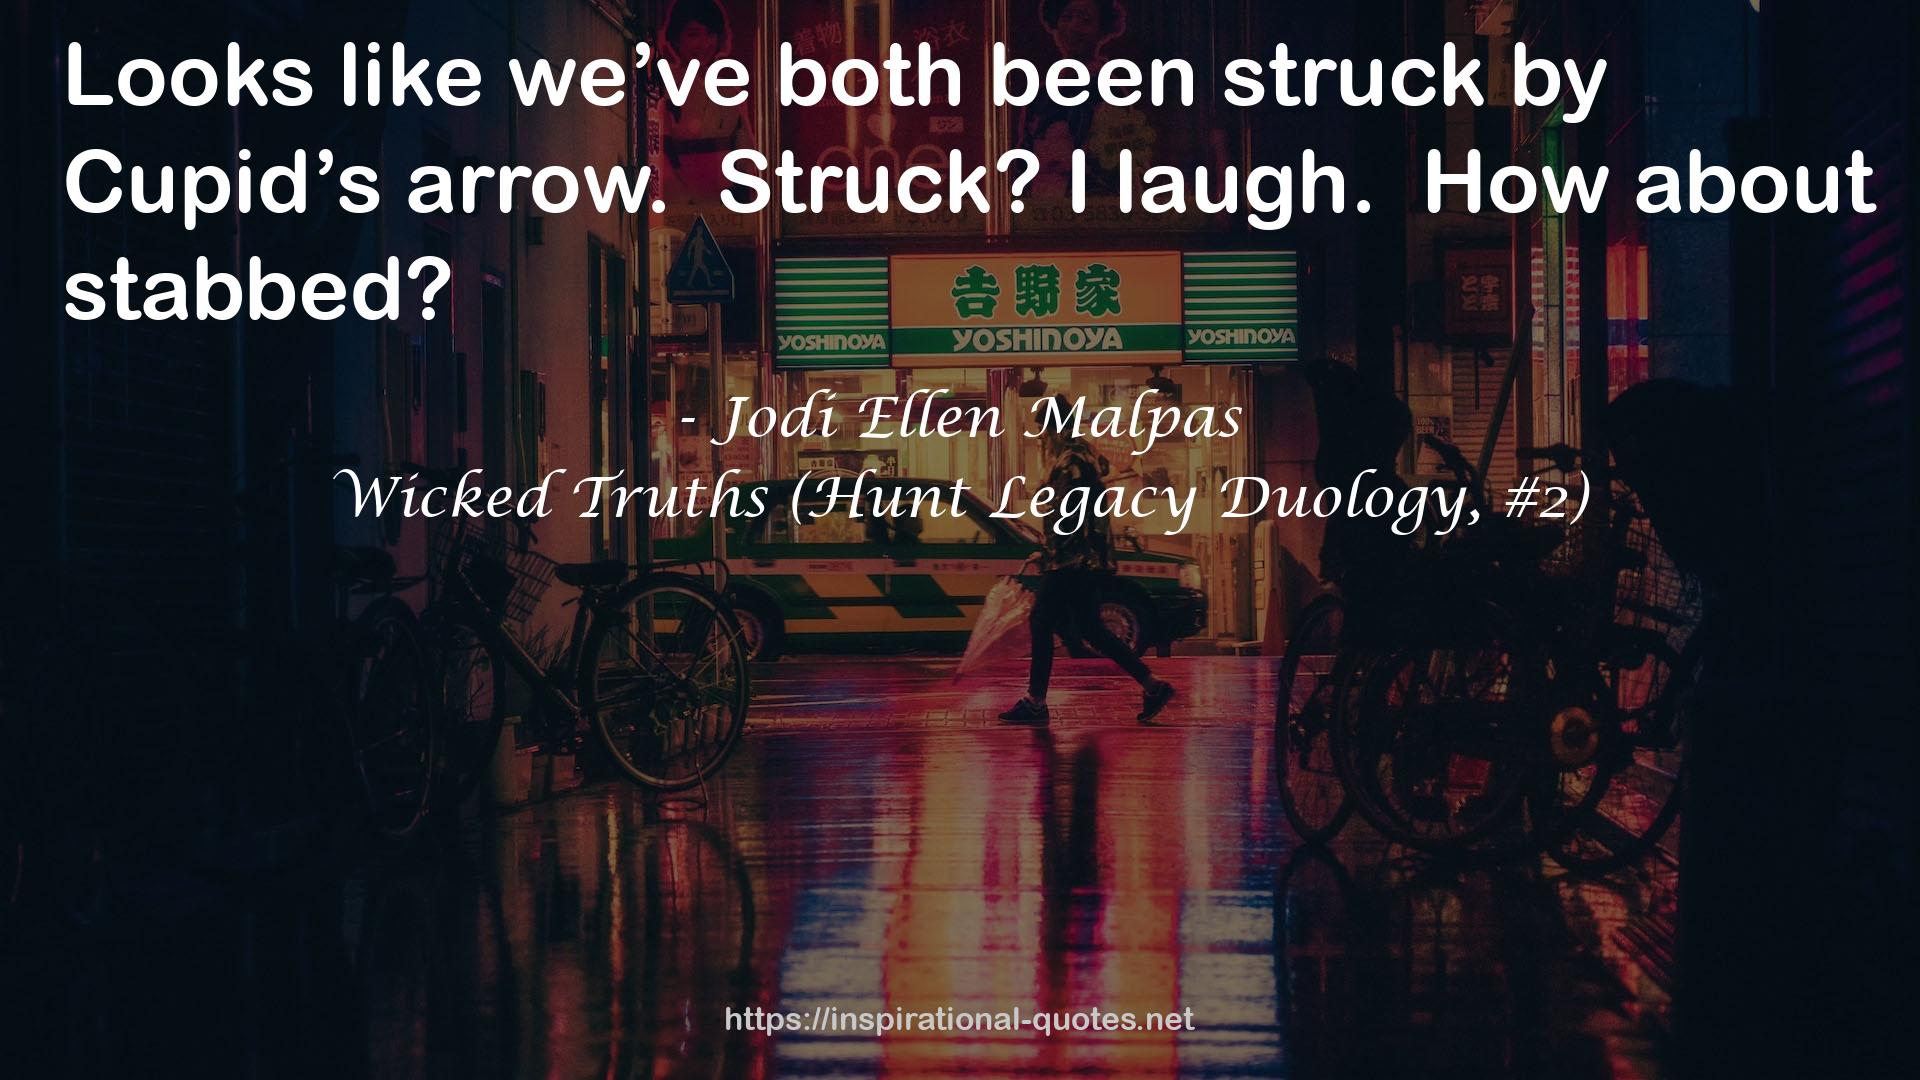 Wicked Truths (Hunt Legacy Duology, #2) QUOTES